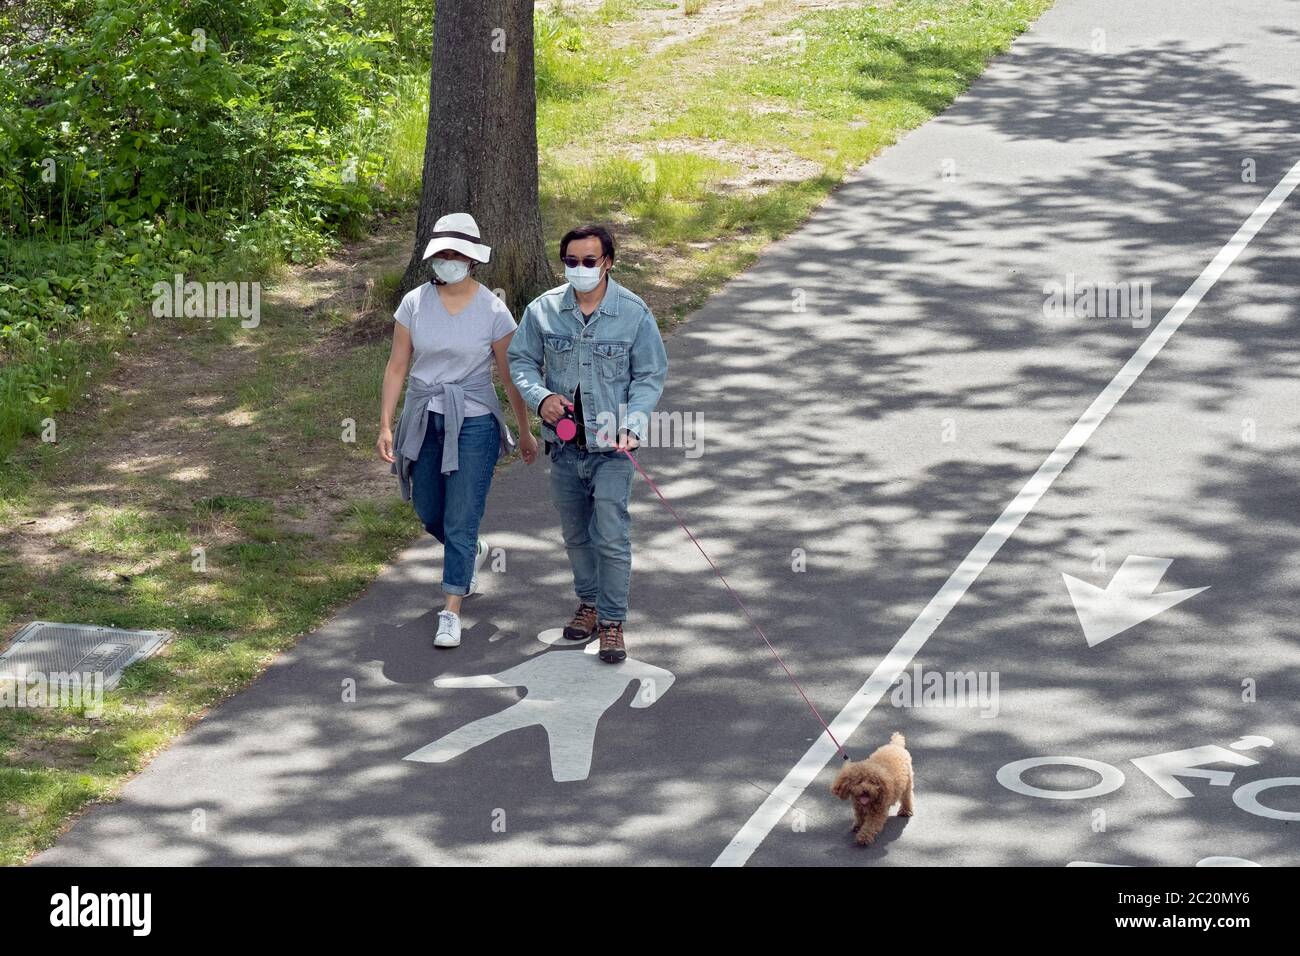 An asian American couple, likely Korean, exercise walk with their dog on a path near te Bayside Marina in Queens, New York City. Stock Photo